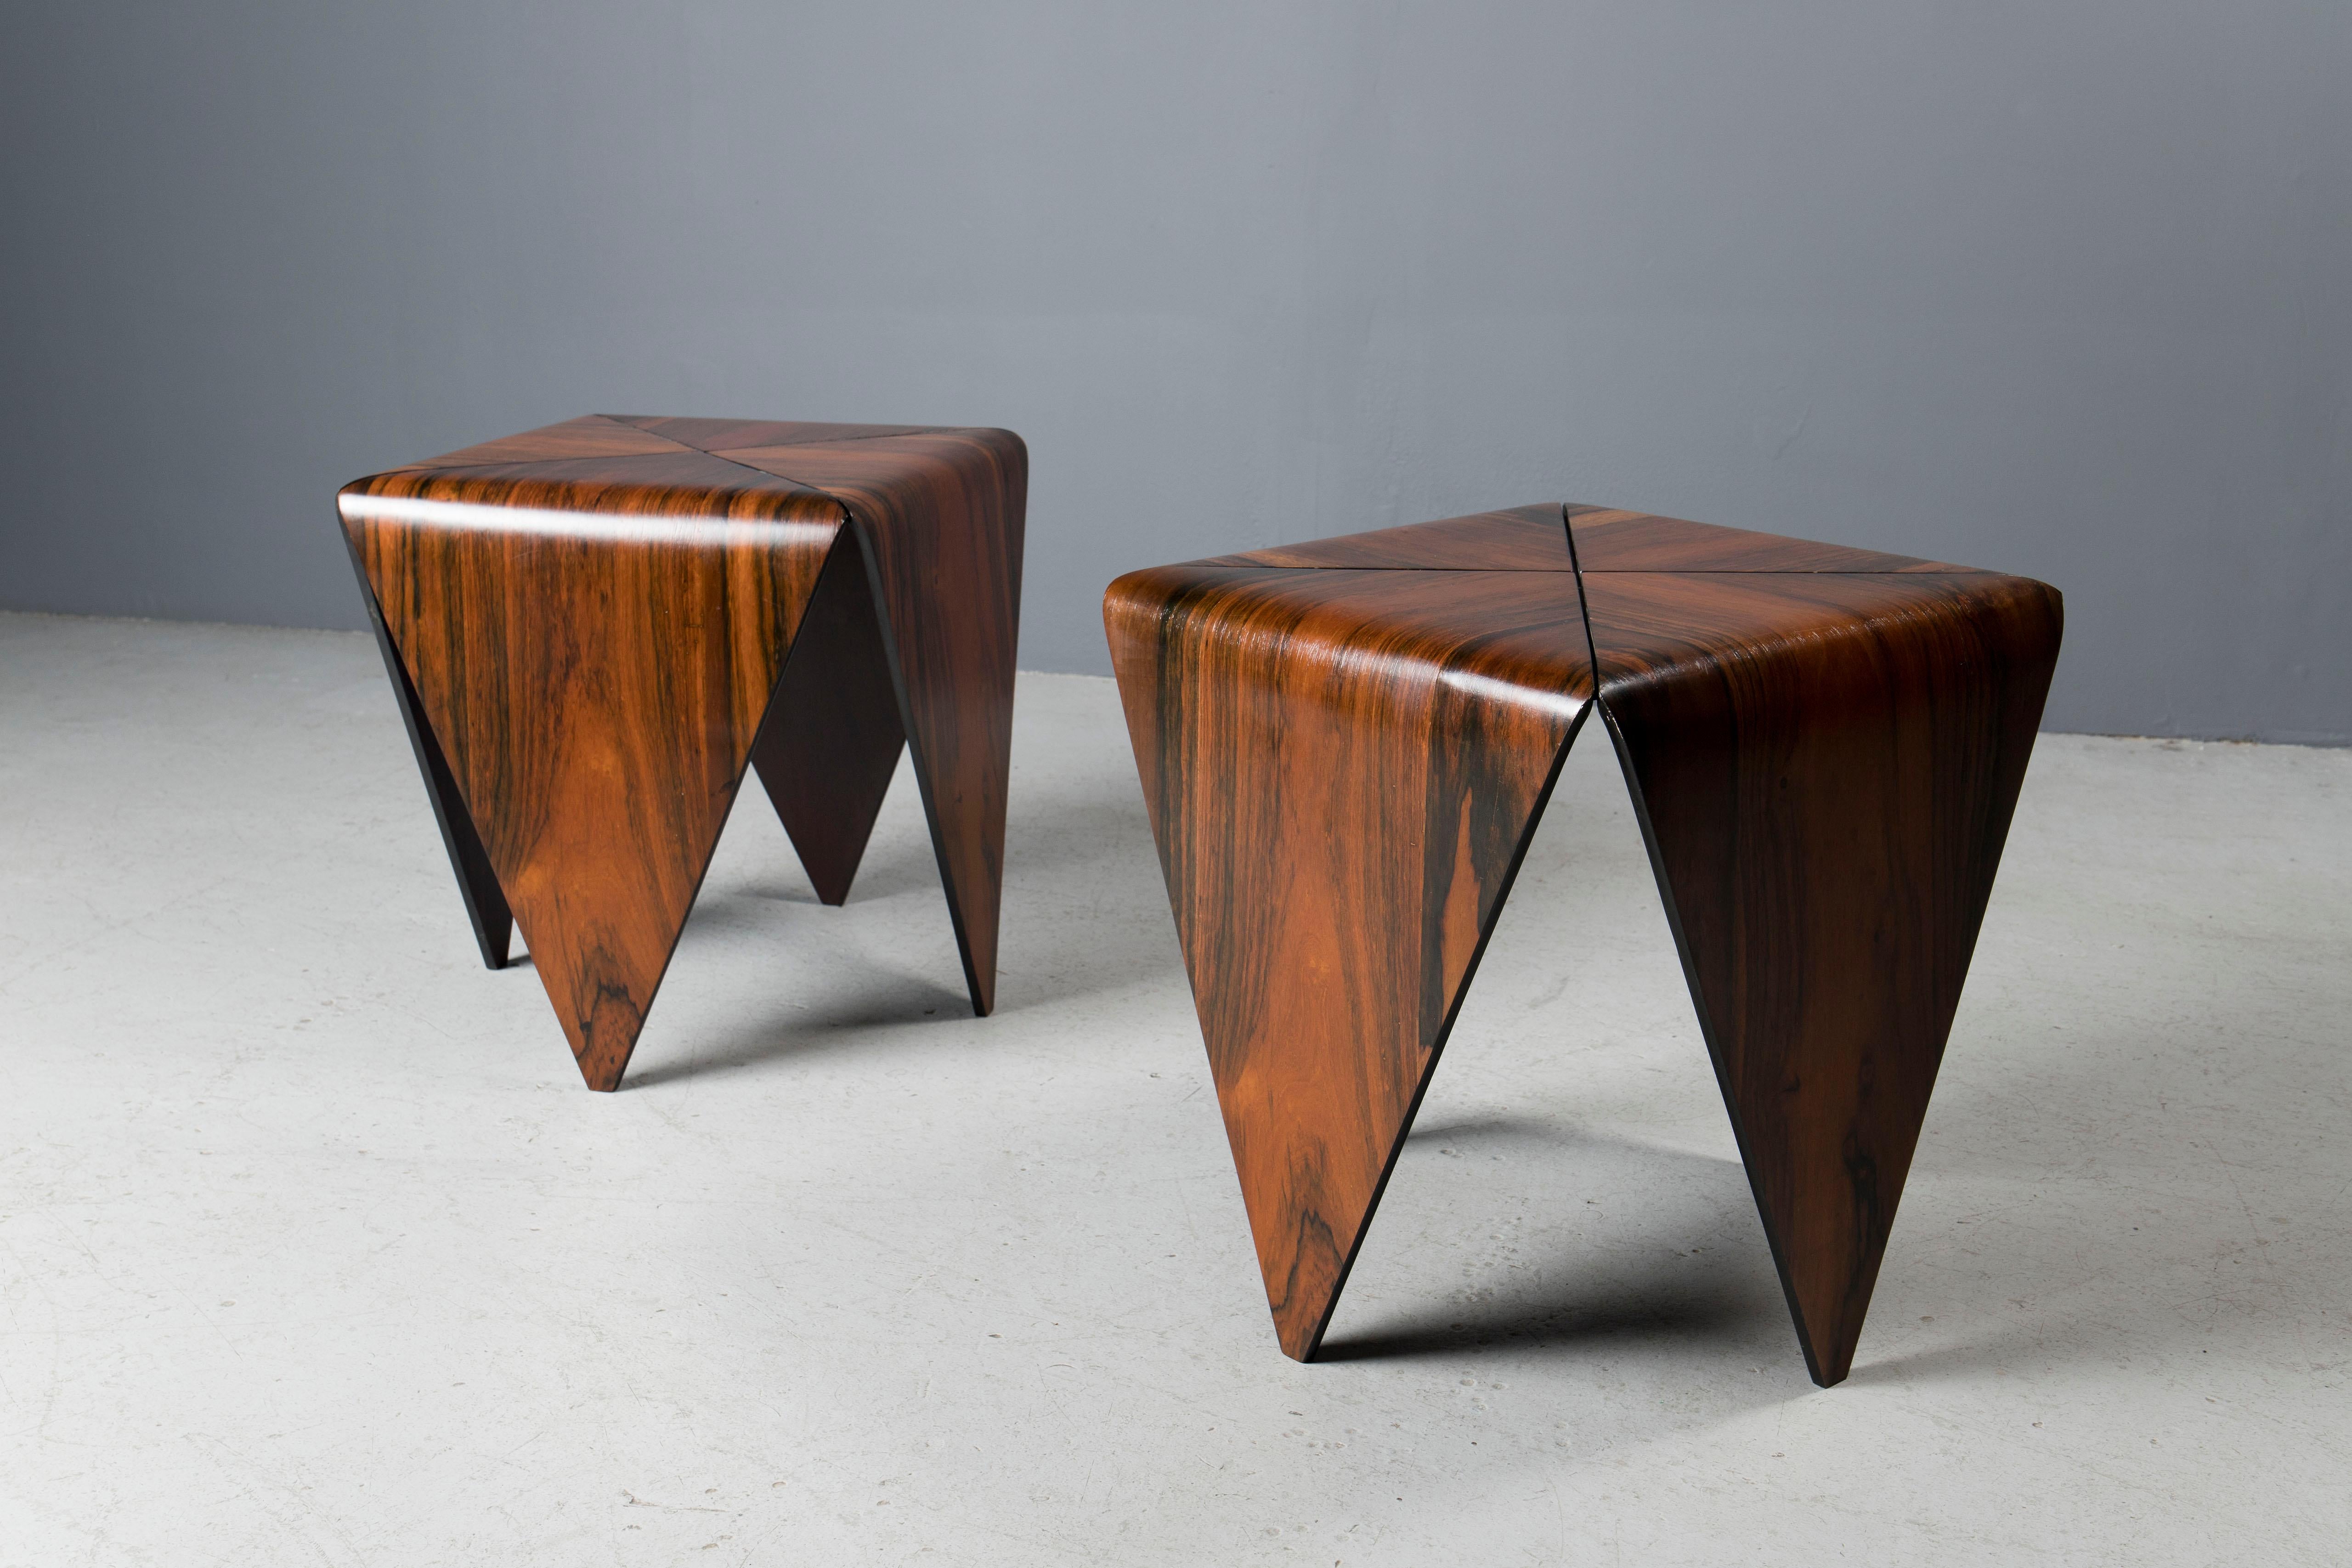 Pair of exceptional Jorge Zalszupin Brazilian rosewood petalas side table from the 1950s.